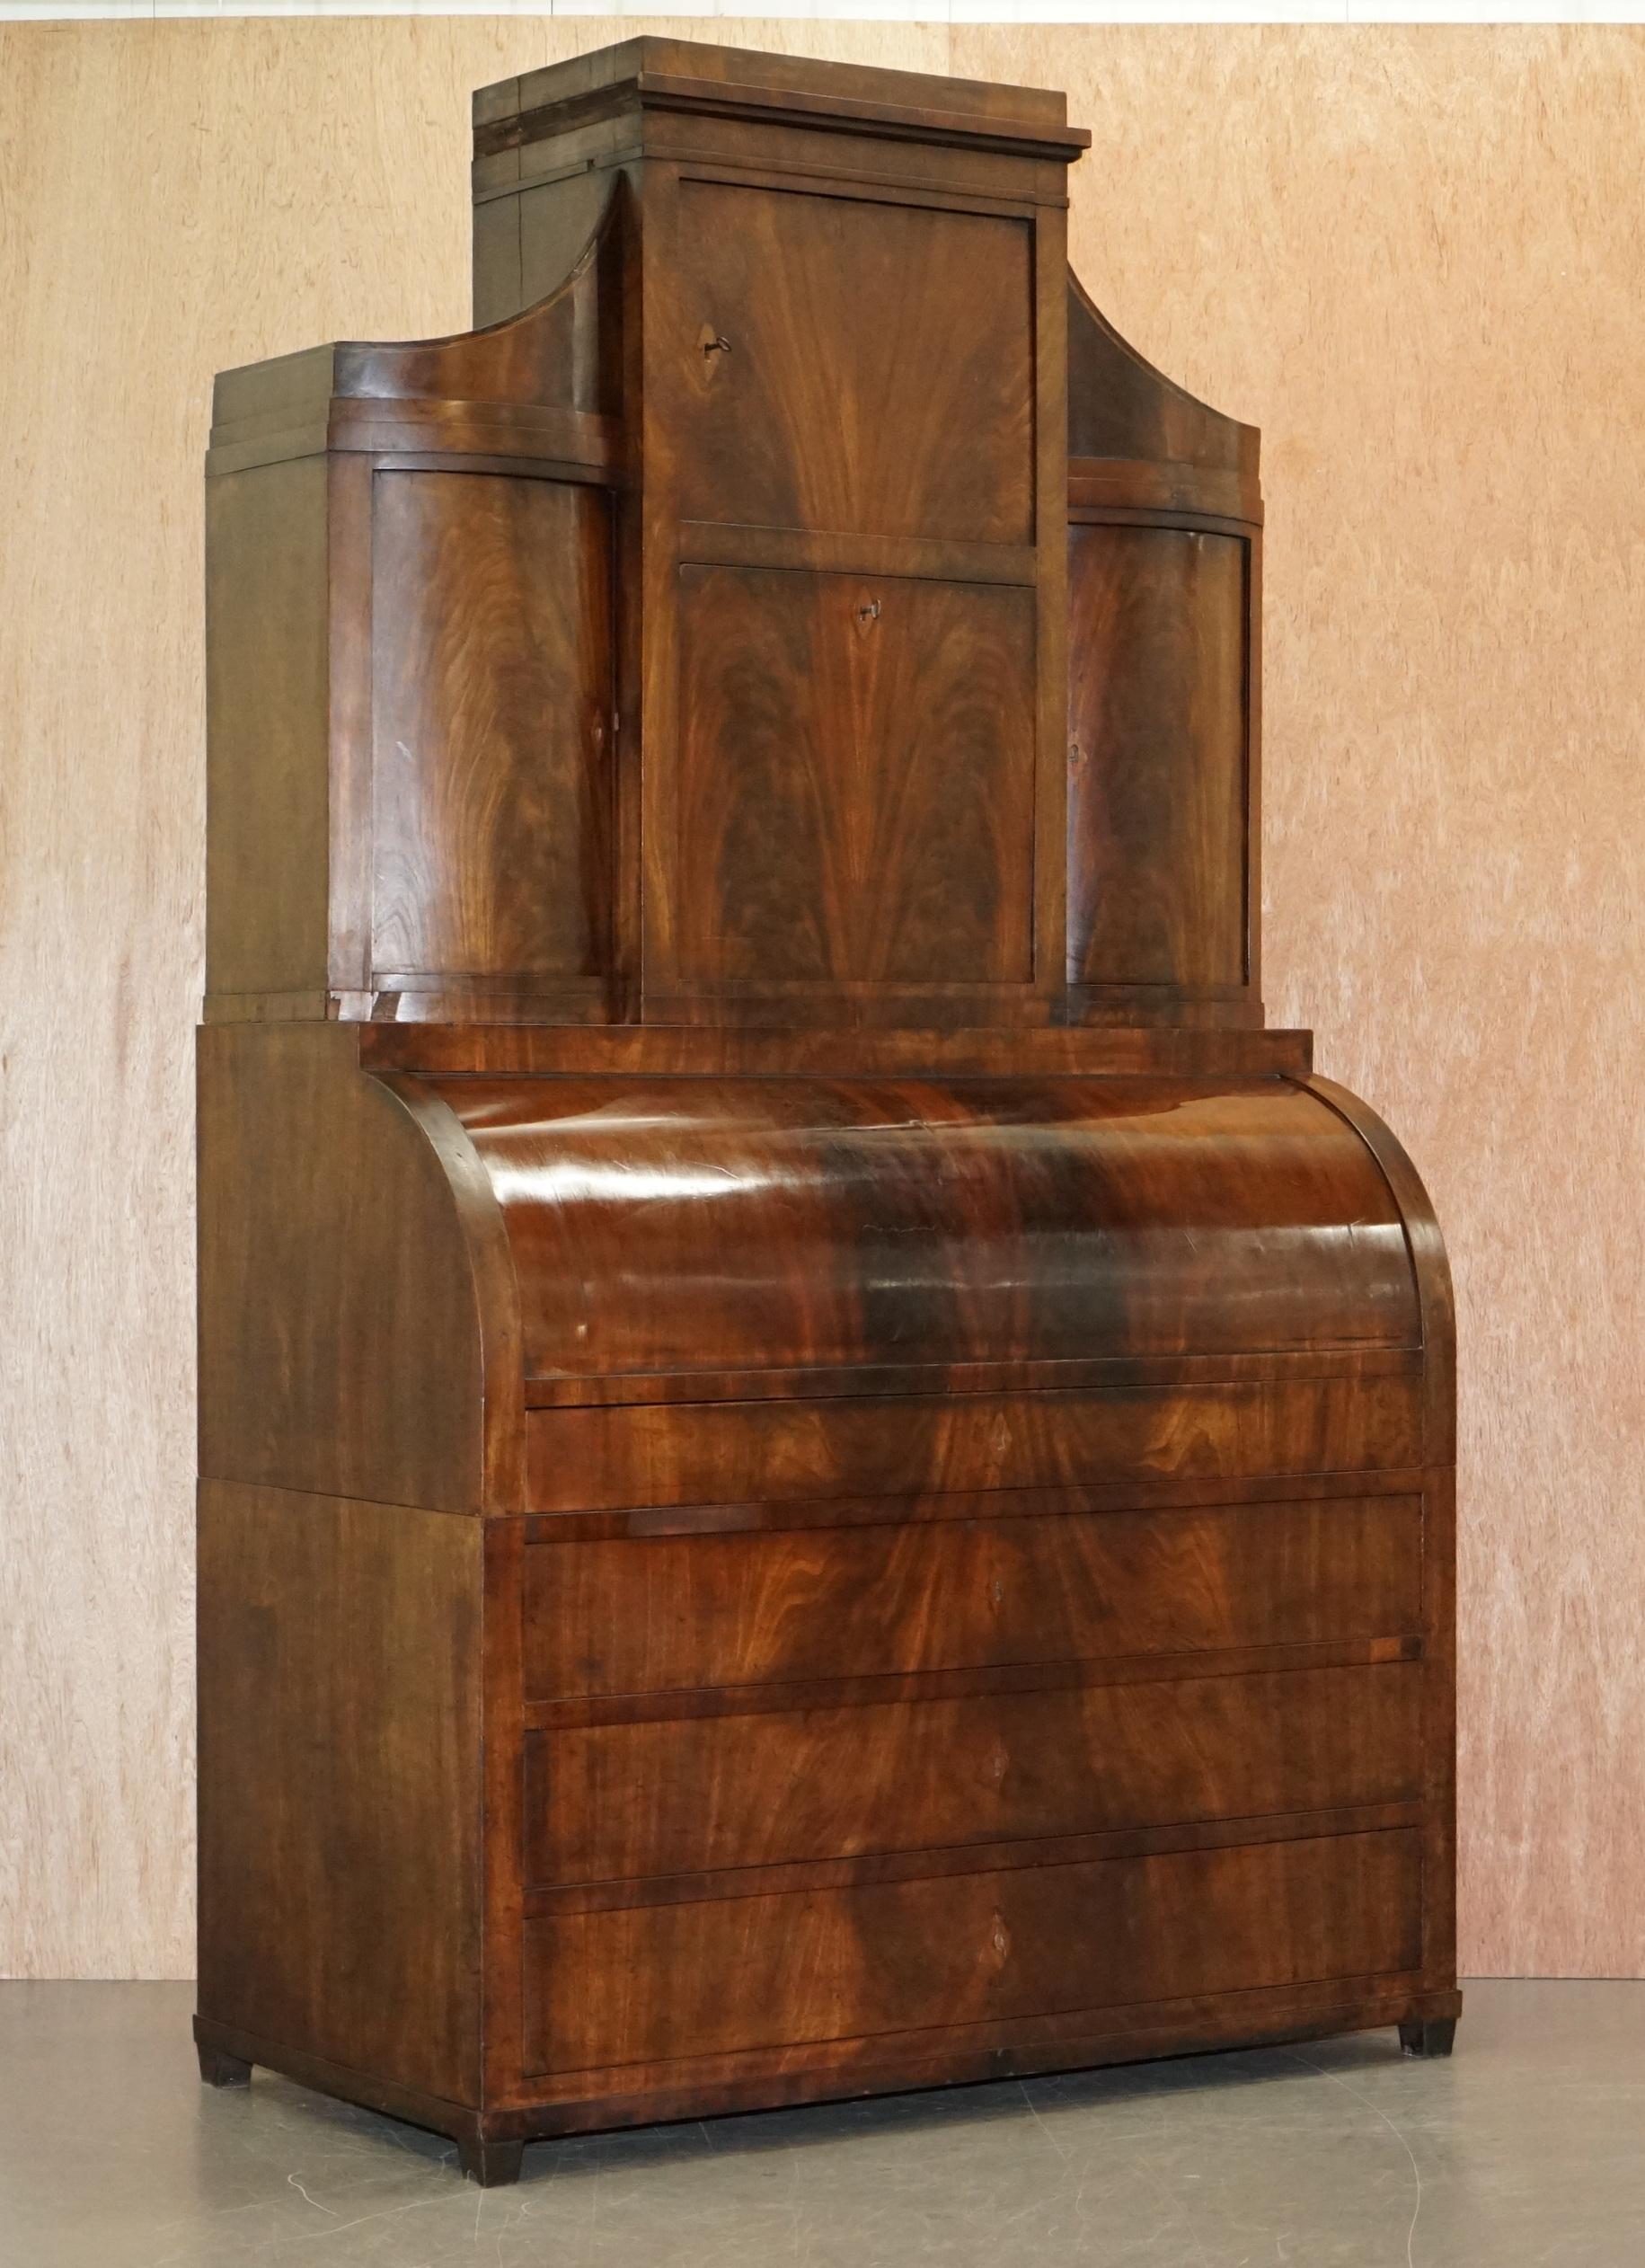 We are is delighted to offer for sale this very fine 19th century Italian cylinder top Bureau bookcase with ornately inlaid internals

This is one of the finest flamed mahogany cylinder top desks I have ever seen, its early 19th century circa